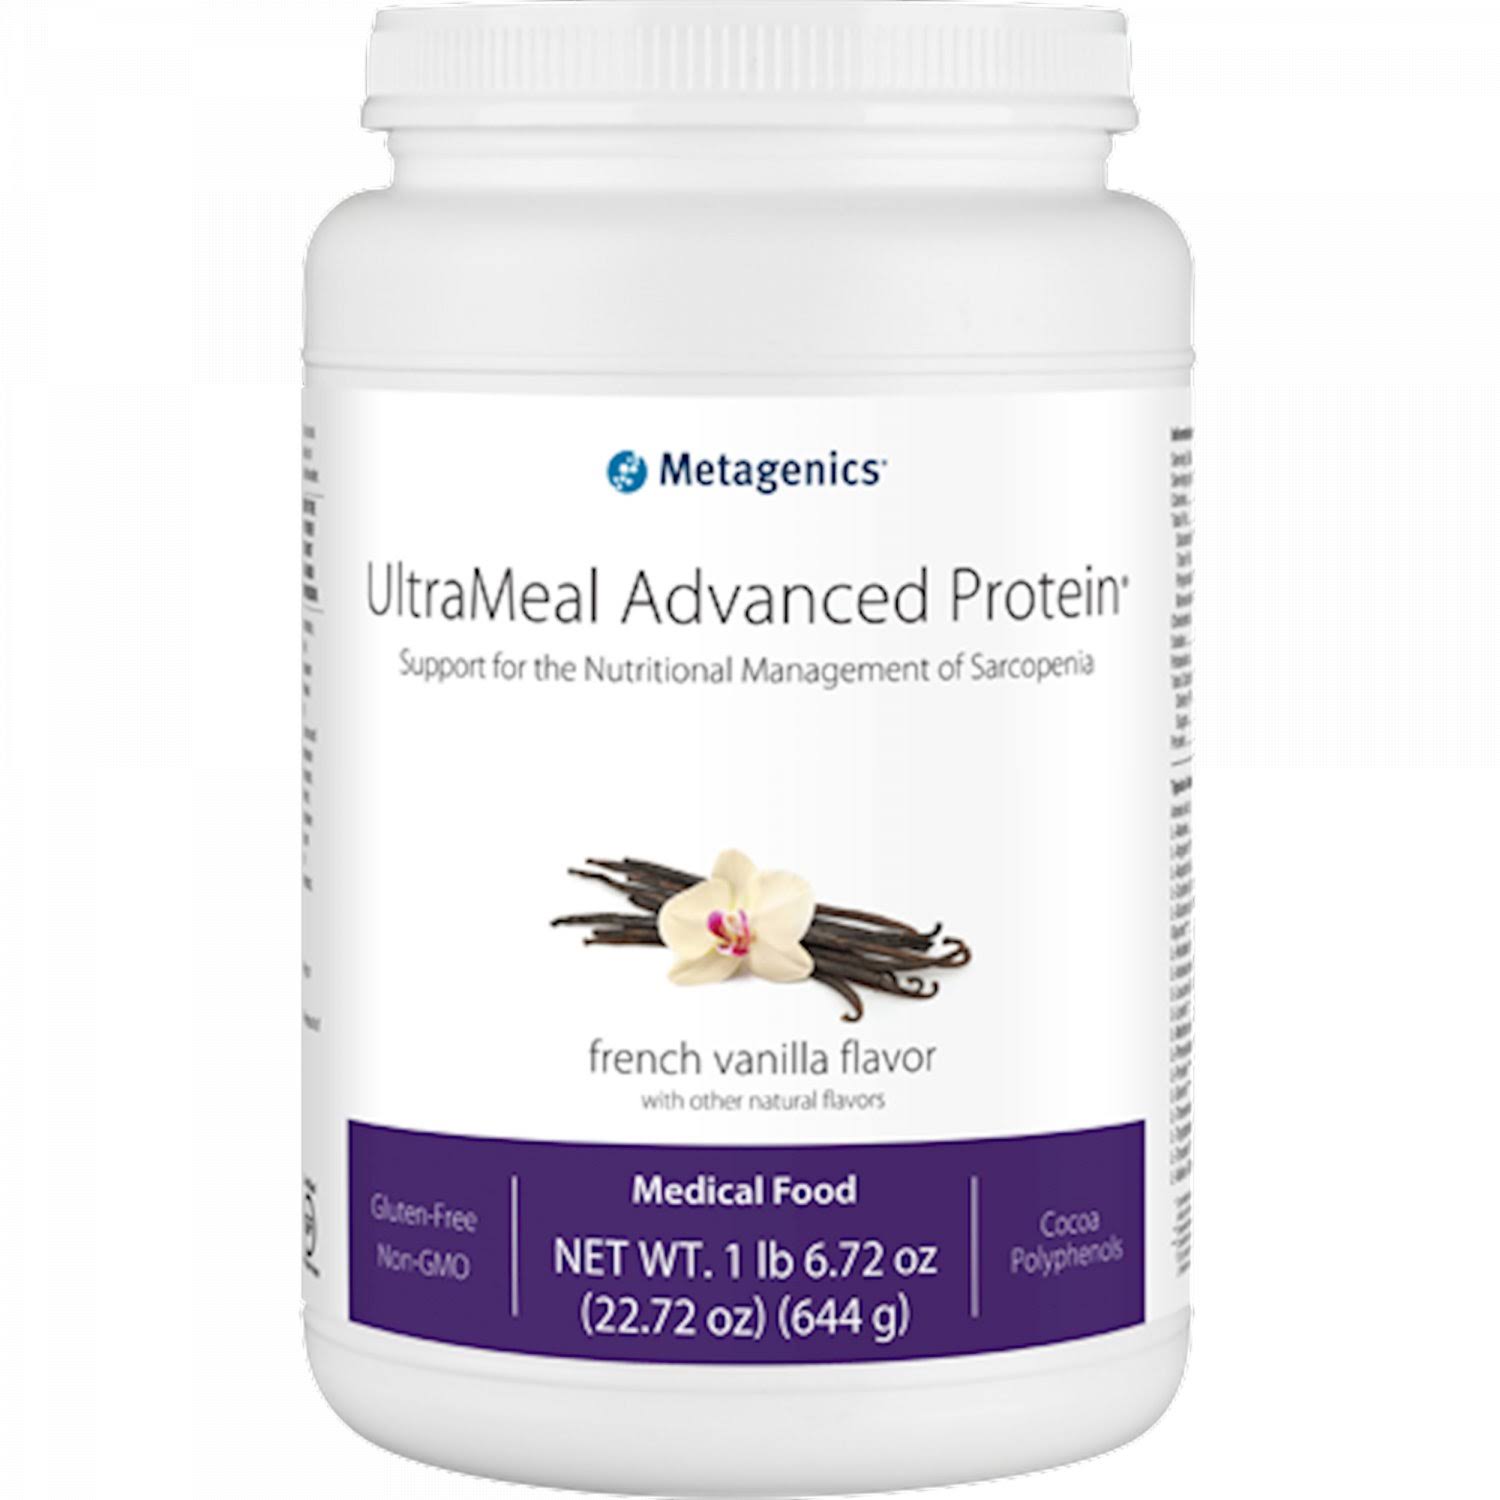 Metagenics Ultra Meal Advanced Protein Dietary Supplement - French Vanilla, 14 Servings